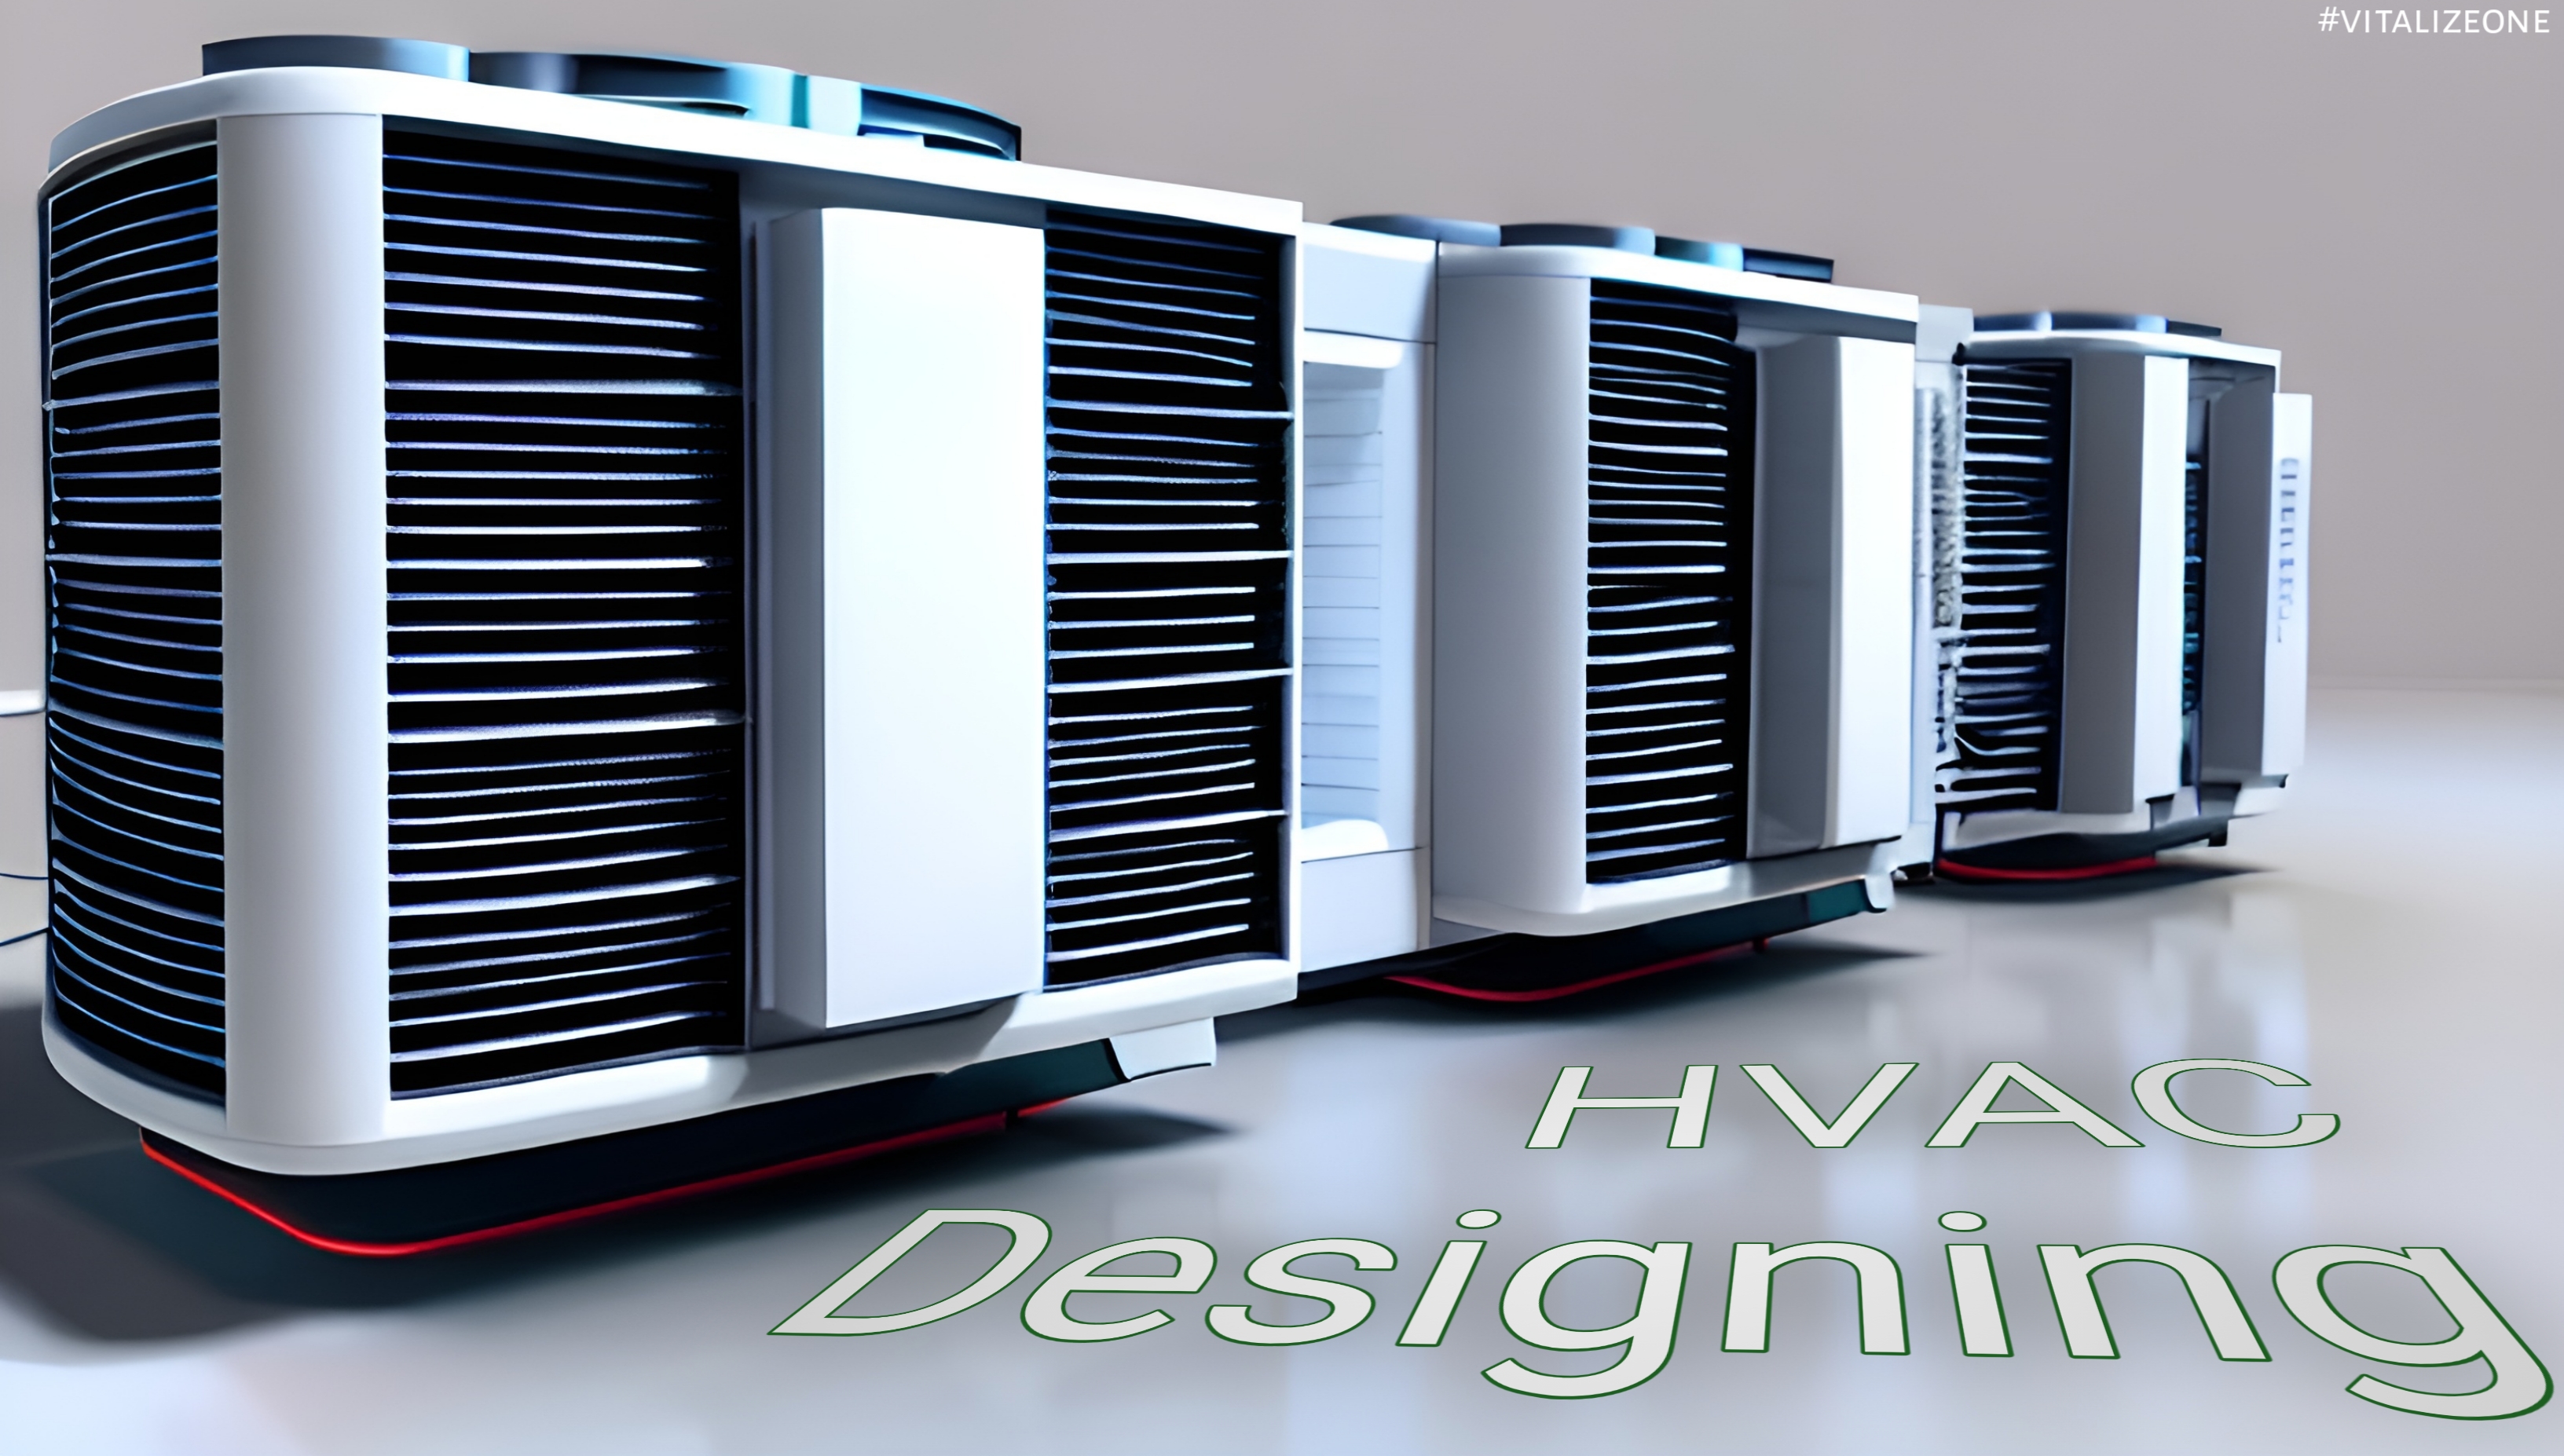 Designing for HVAC: Key Considerations for Contractors | VitalyTennant.com | #vitalizeone 1